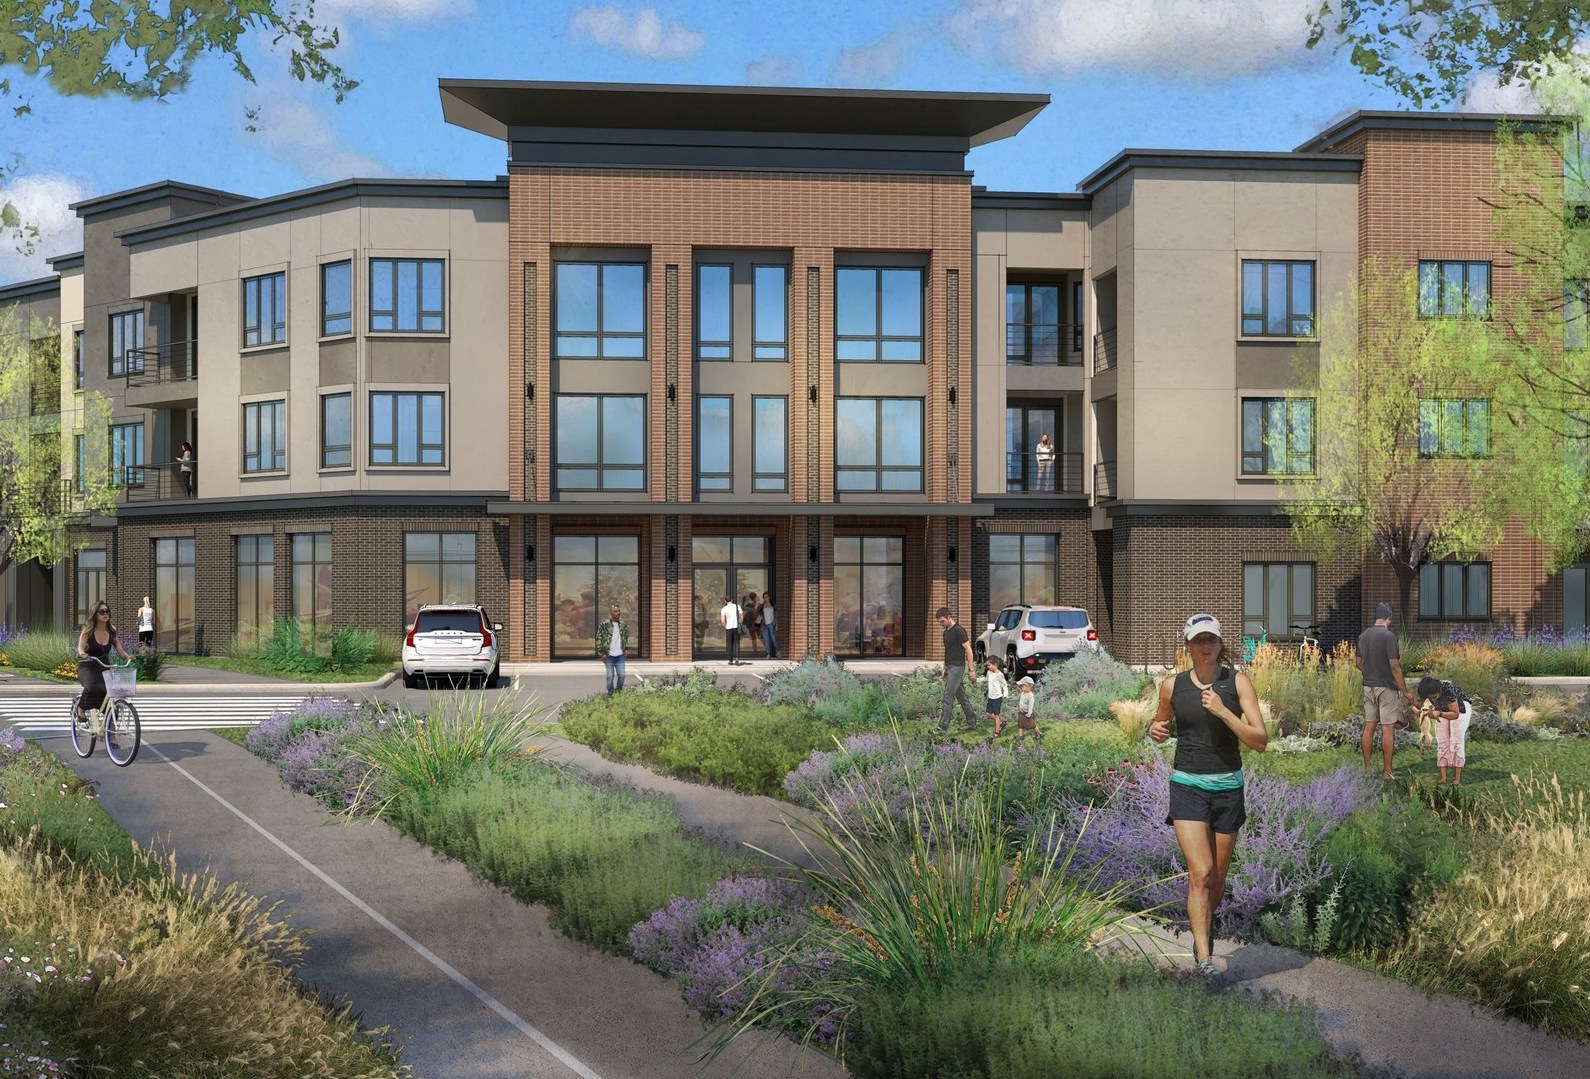 Embrey Announces Land Acquisition Closing for 304-Unit Hensley at The District Apartment Community in Denver Submarket of Centennial